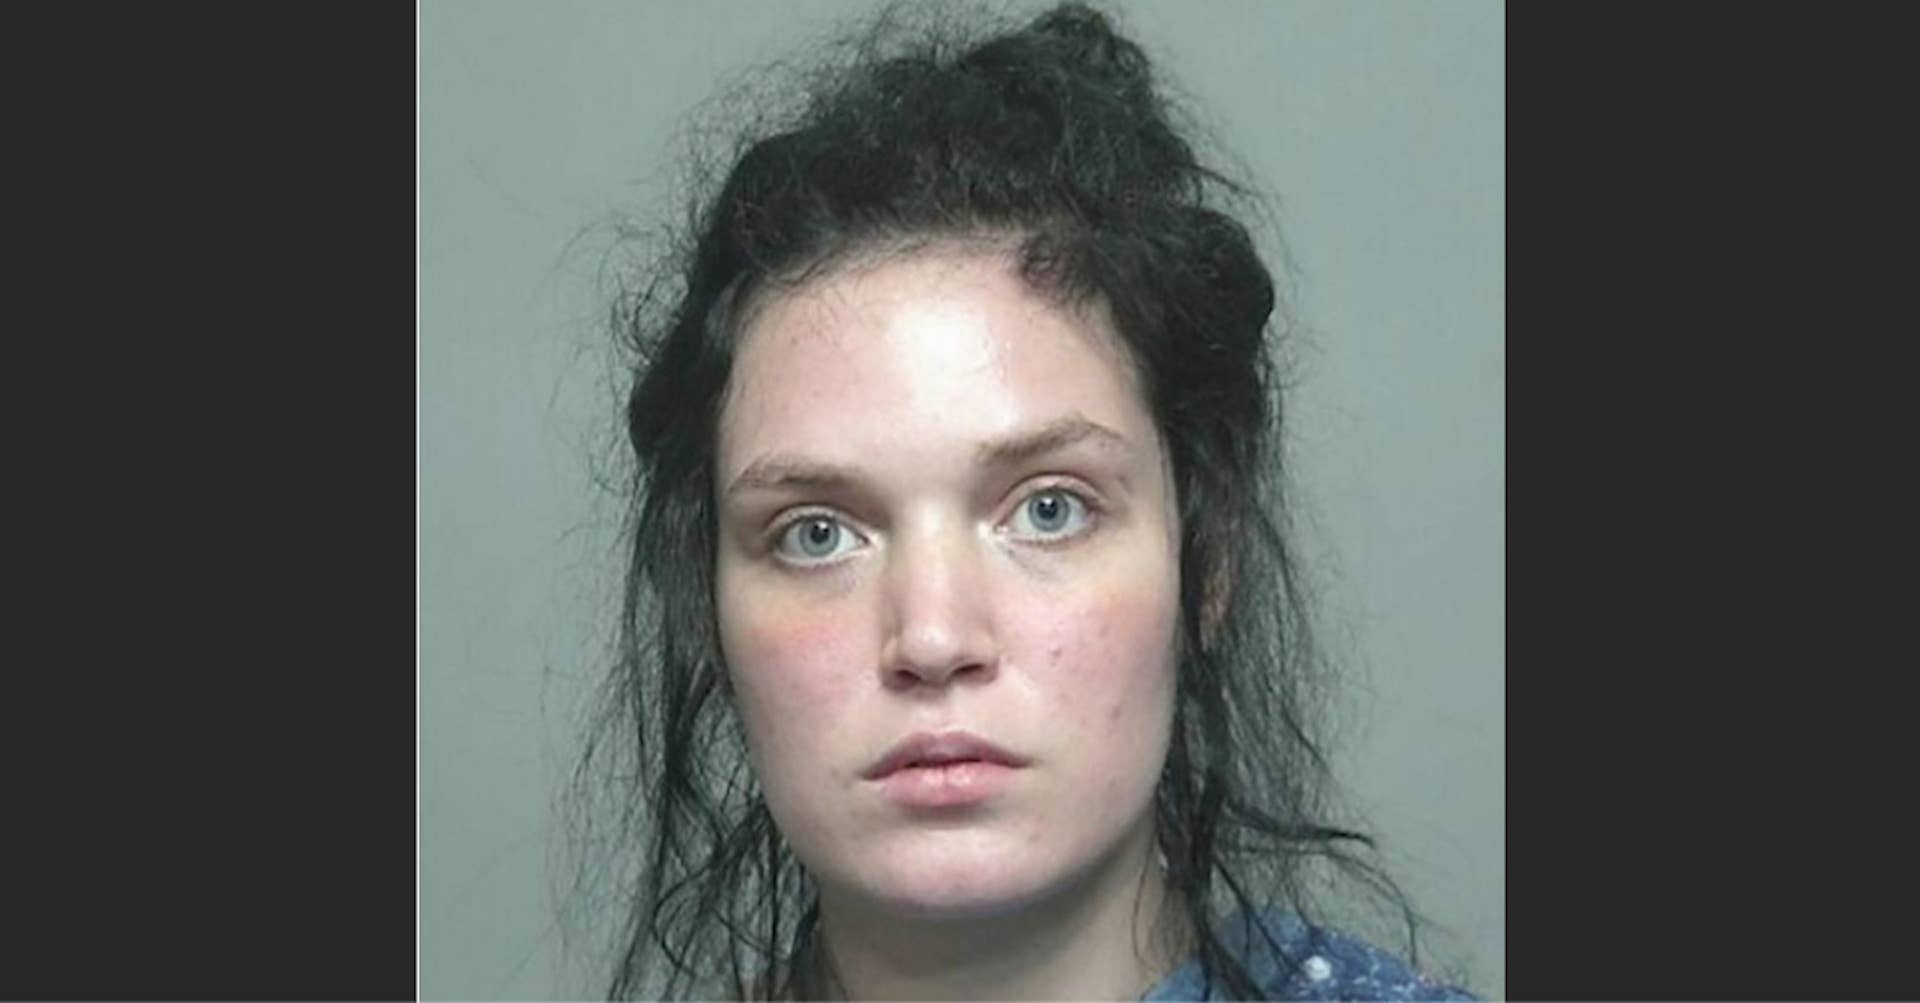 Justine Johnson (Courtesy of the Losco County Sheriff's Office)